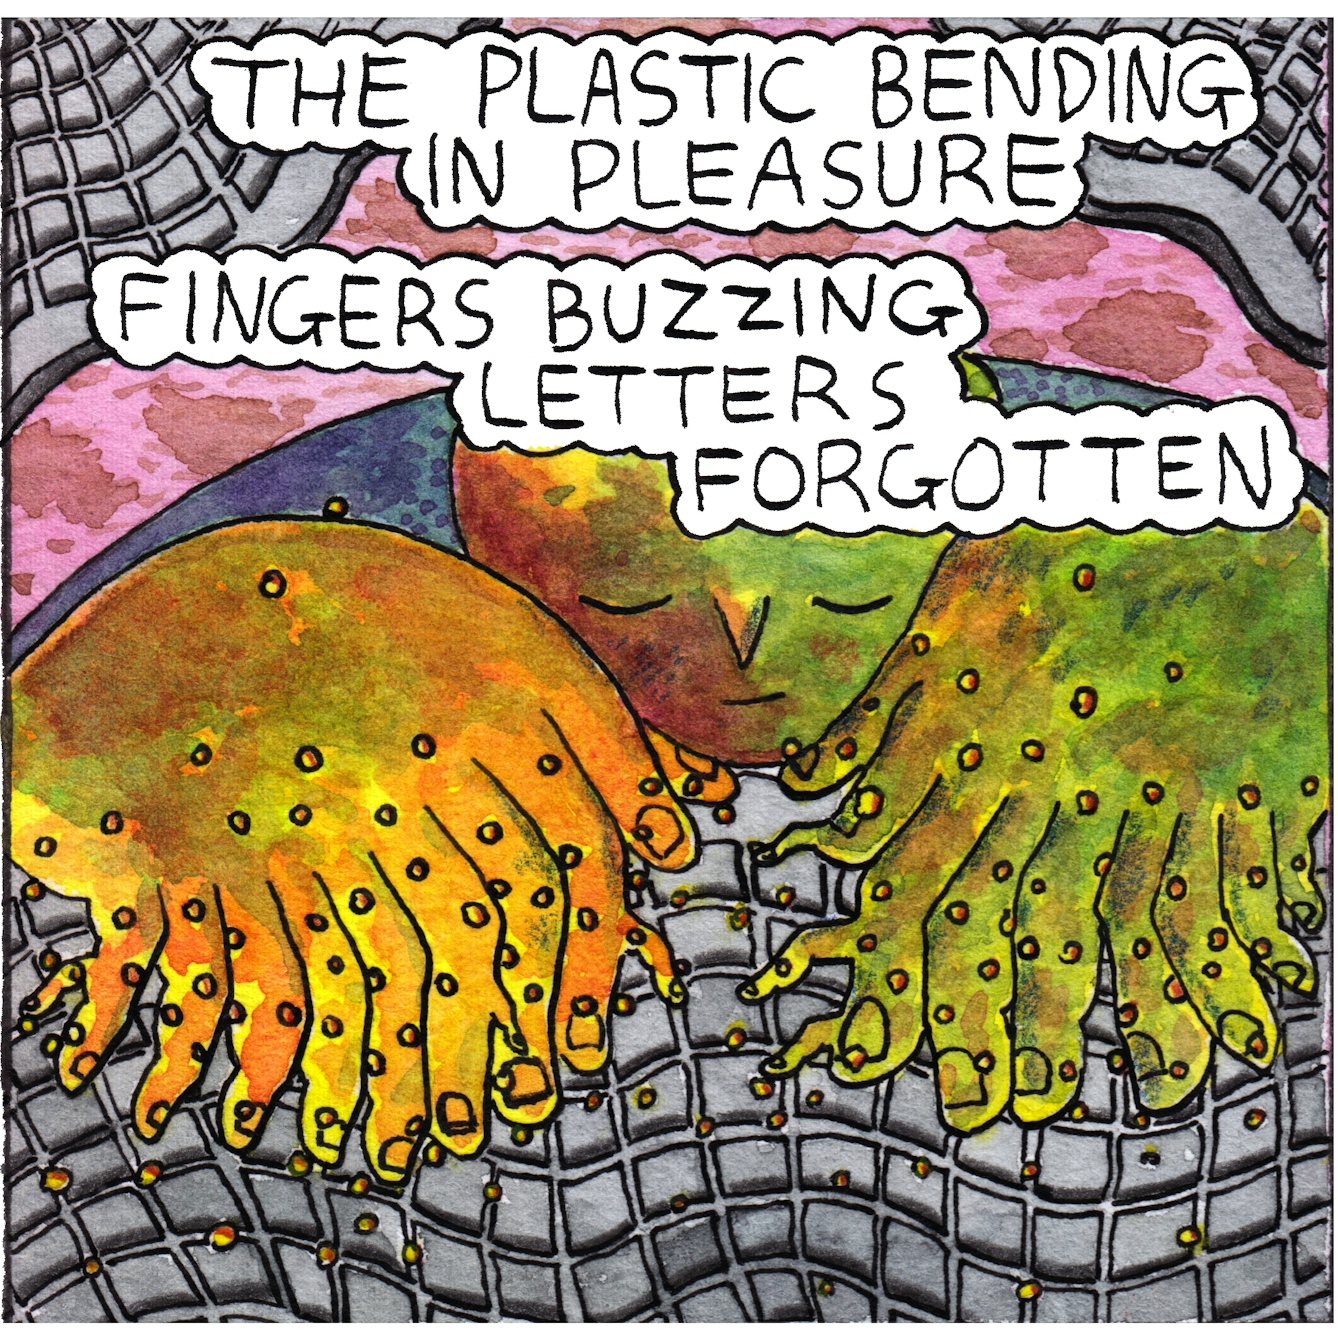 Panel 5 of the webcomic 'Doing emails' shows the same downcast figure slumped over a keyboard. Their large hands have expanded to 9-10 fingers on each hand and several smaller fingers sprout from the larger fingers. The huge hands rest on an equally large and distorted keyboard with undulating keys. Two similar keyboards appear in each of the top corners of the panel, as if wrapping around the figure. The text bubble at the top of the panel says: The plastic bending in pleasure. Fingers buzzing 